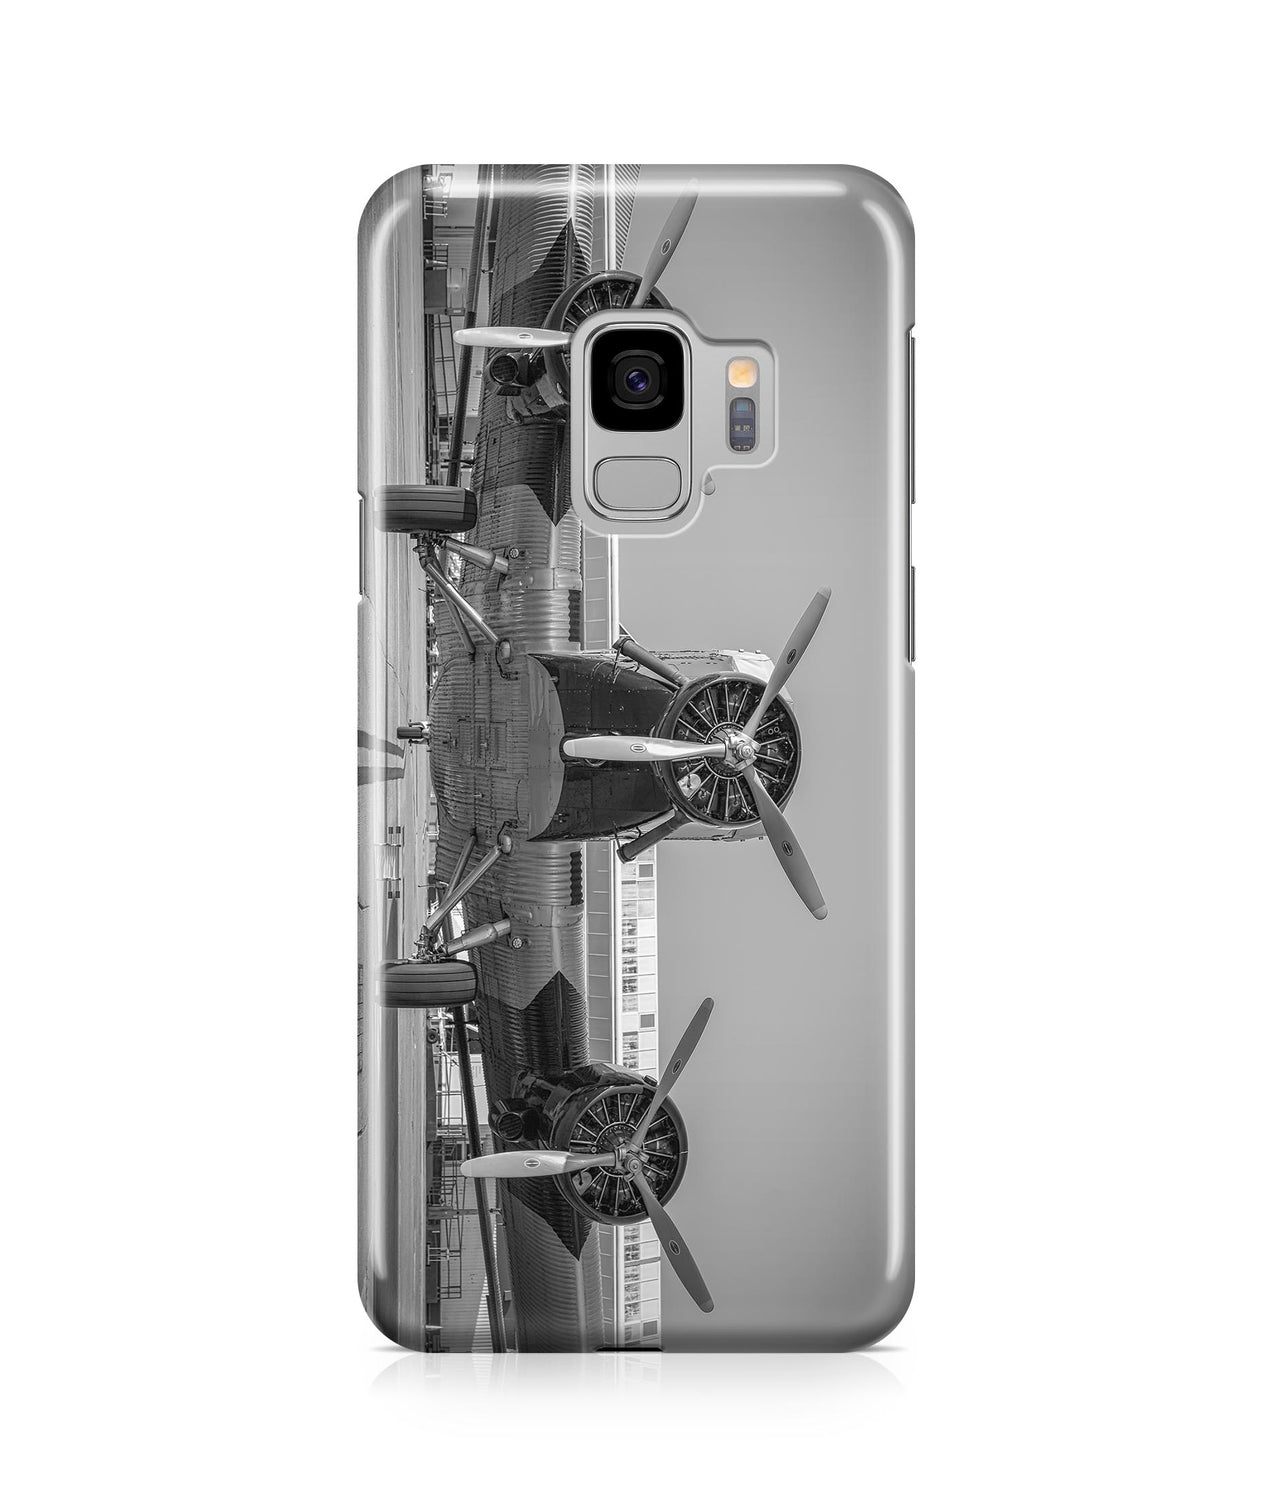 Face to Face to 3 Engine Old Airplane Printed Samsung J Cases